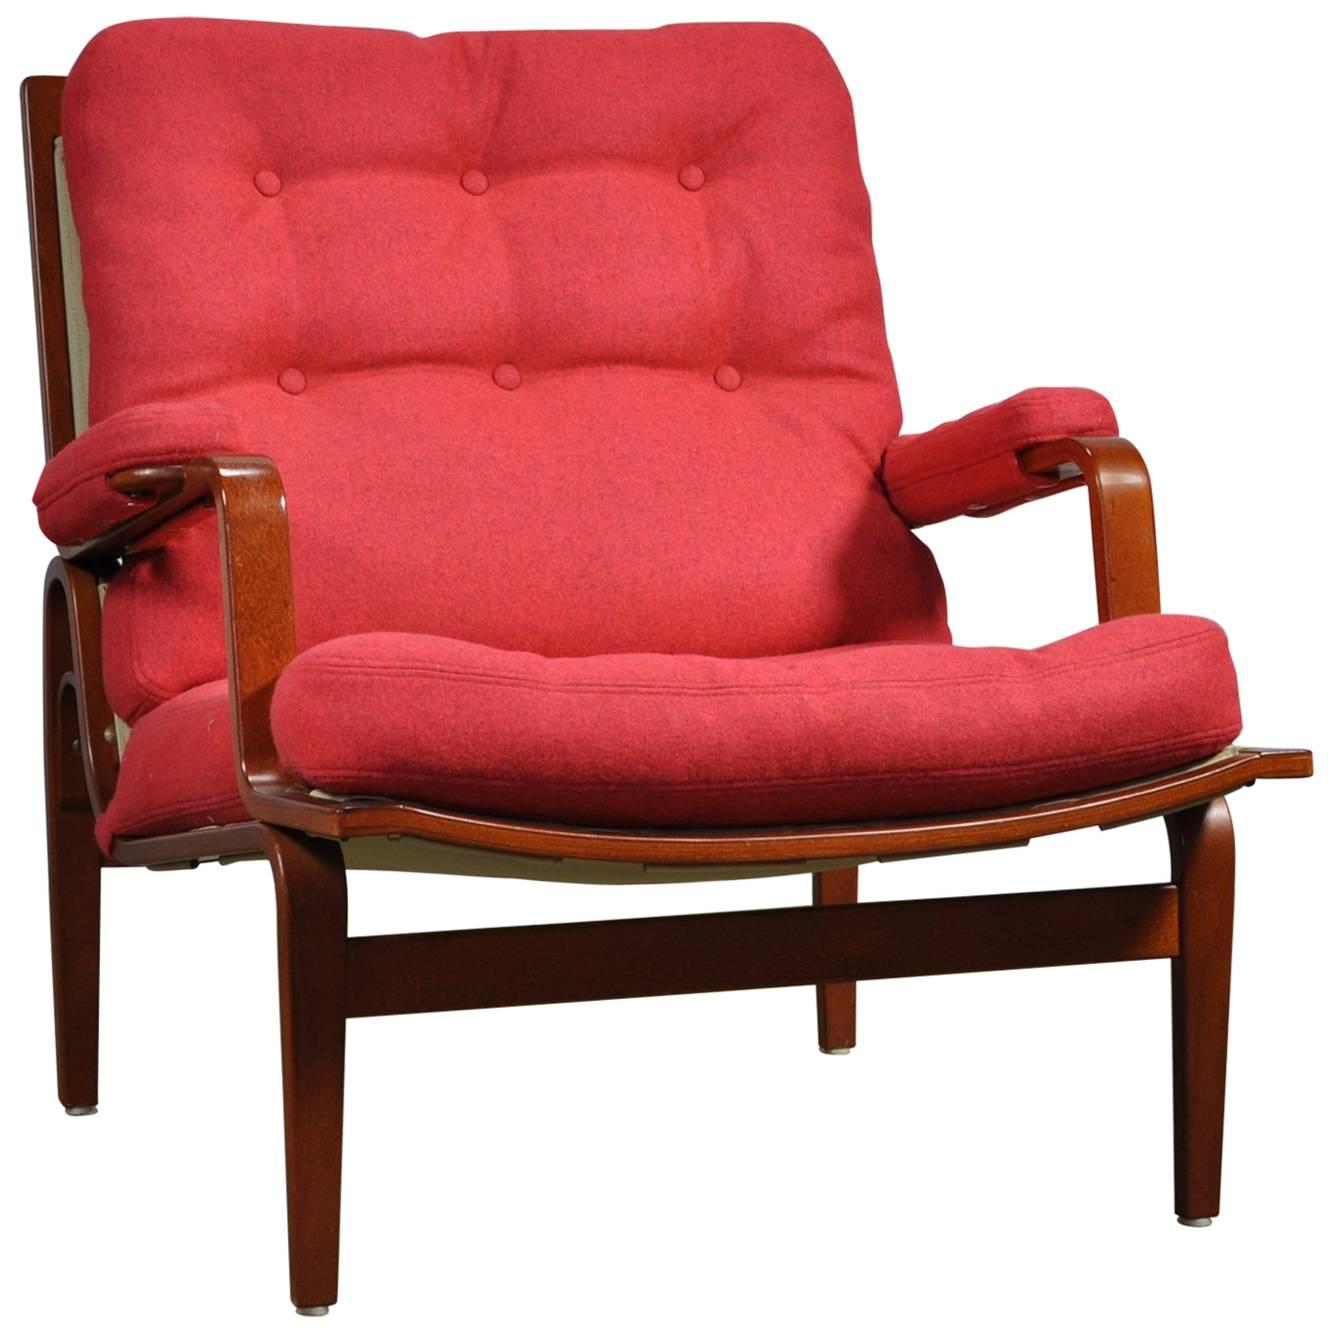 Red Bruno Mathsson Ingrid Chair in Woollen Felt Fabric Made by DUX For Sale